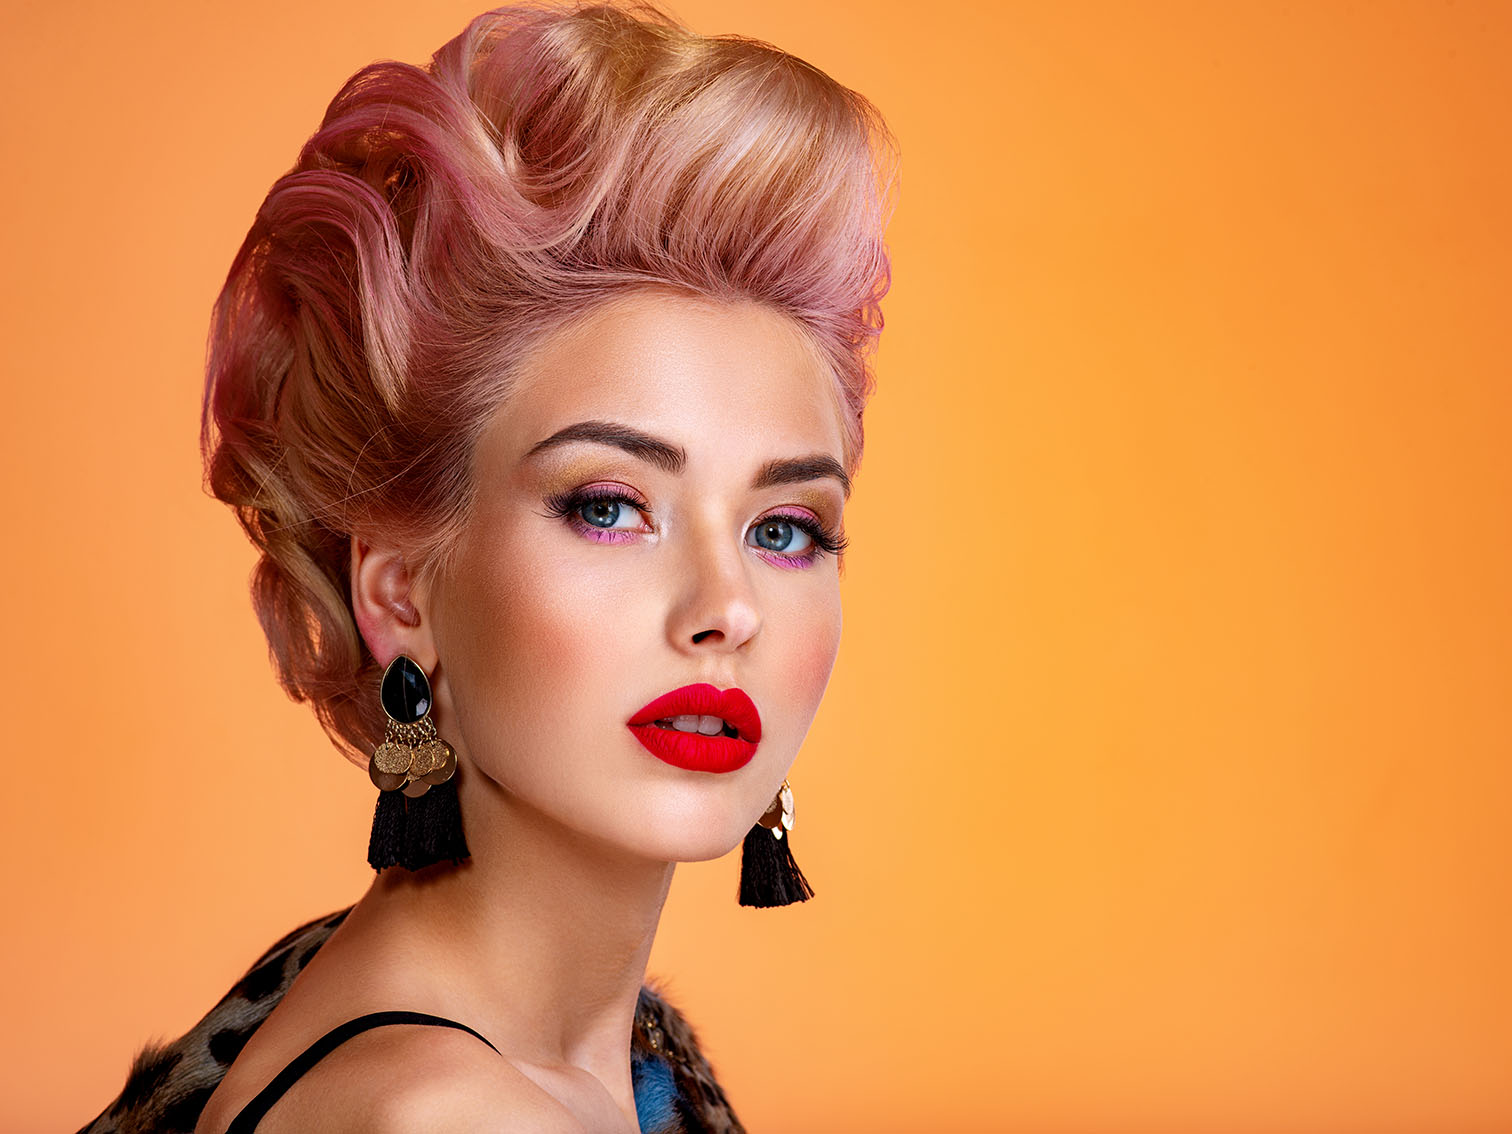 Beautiful woman with creative hairstyle, vivid makeup. Fashionable girl. Beautiful face of young woman with red lips. Stunning blonde girl. Bright eye makeup. Attractive caucasian model with earrings